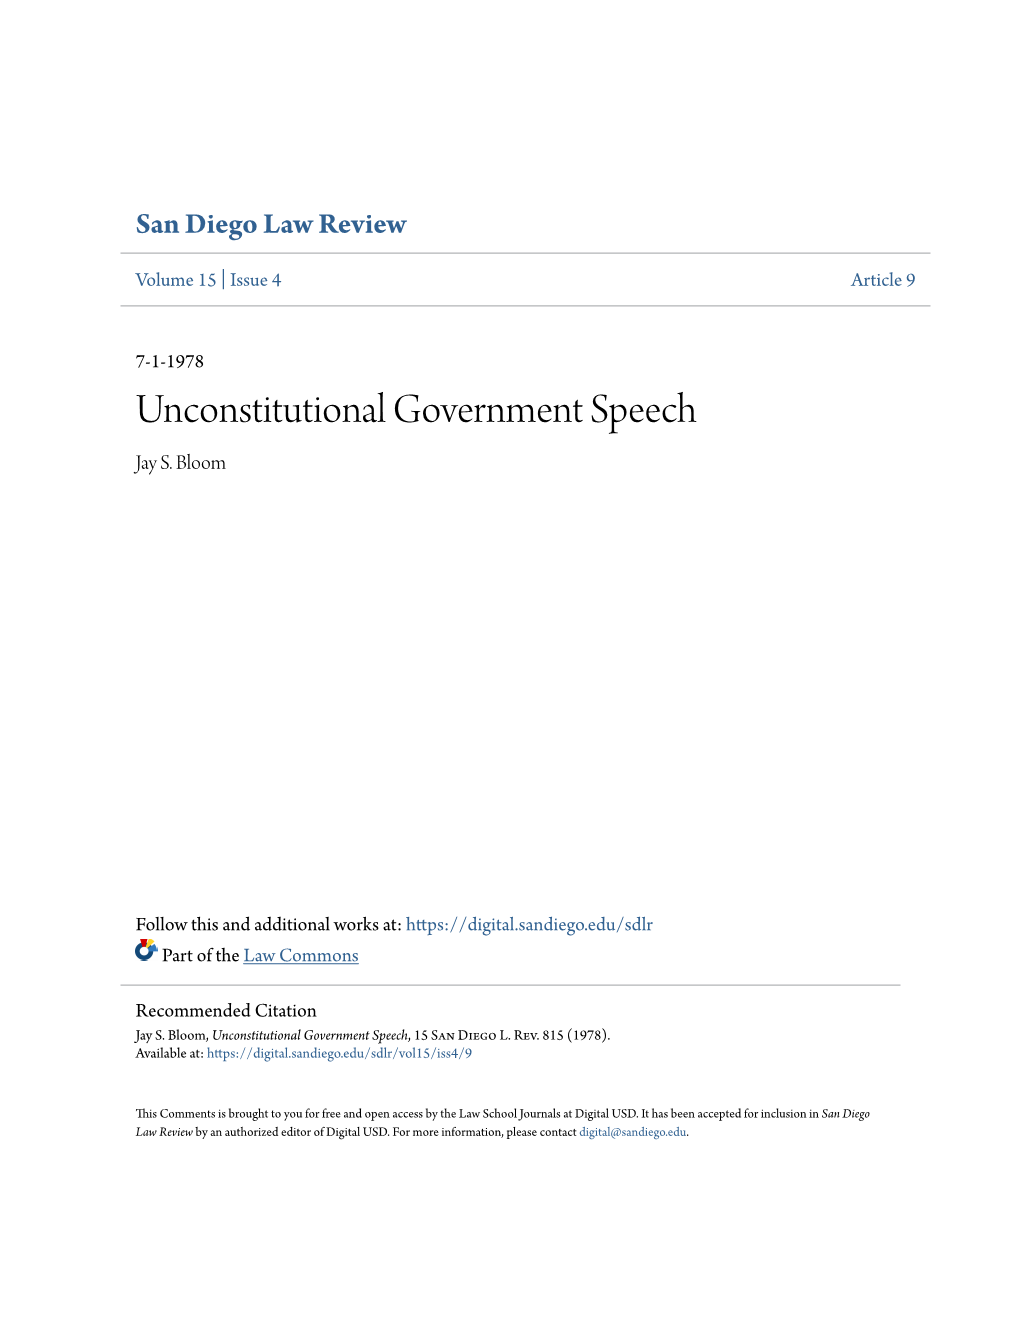 Unconstitutional Government Speech Jay S